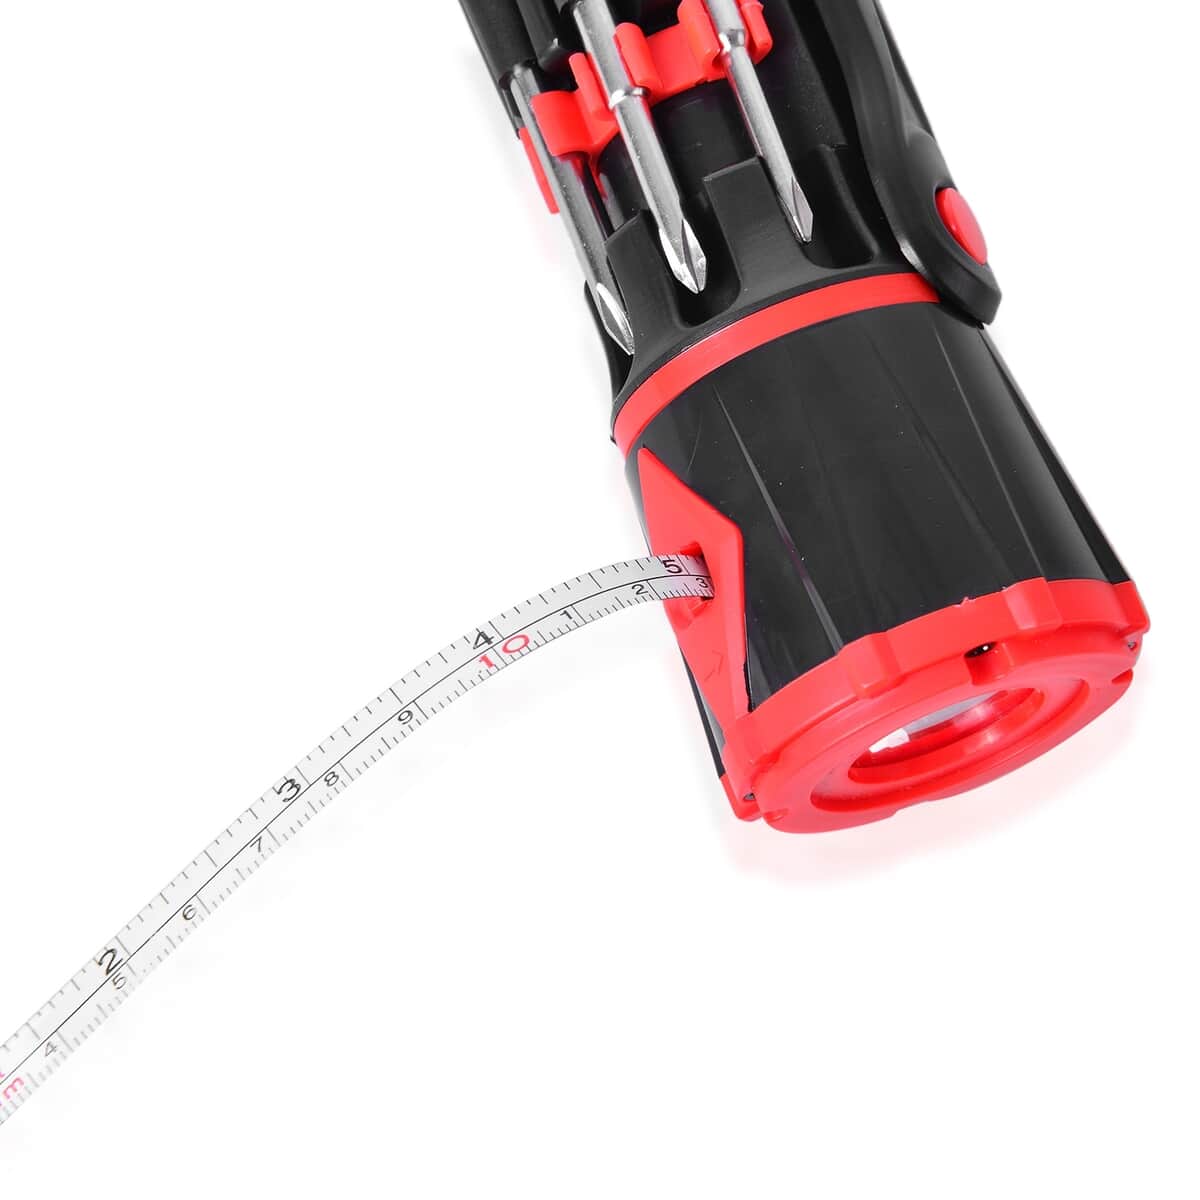 Red 10-in-1 LED Multi-Functional Screwdriver Tool (Requires 3 AAA) image number 5